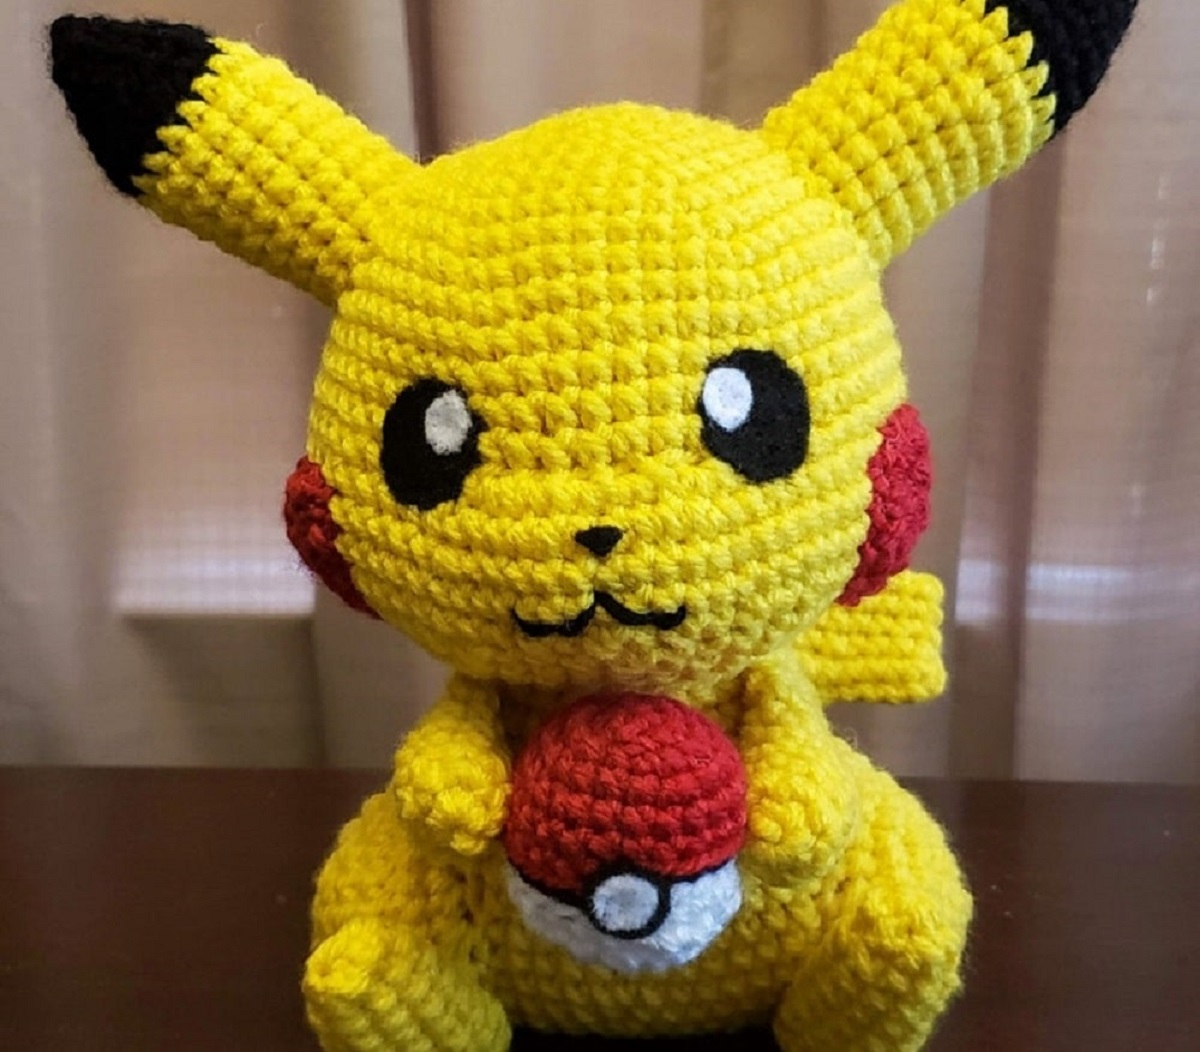 Large stuffed yellow crochet Pikachu toy holding a red, white, and black Pokeball sitting on a dark wooden floor.